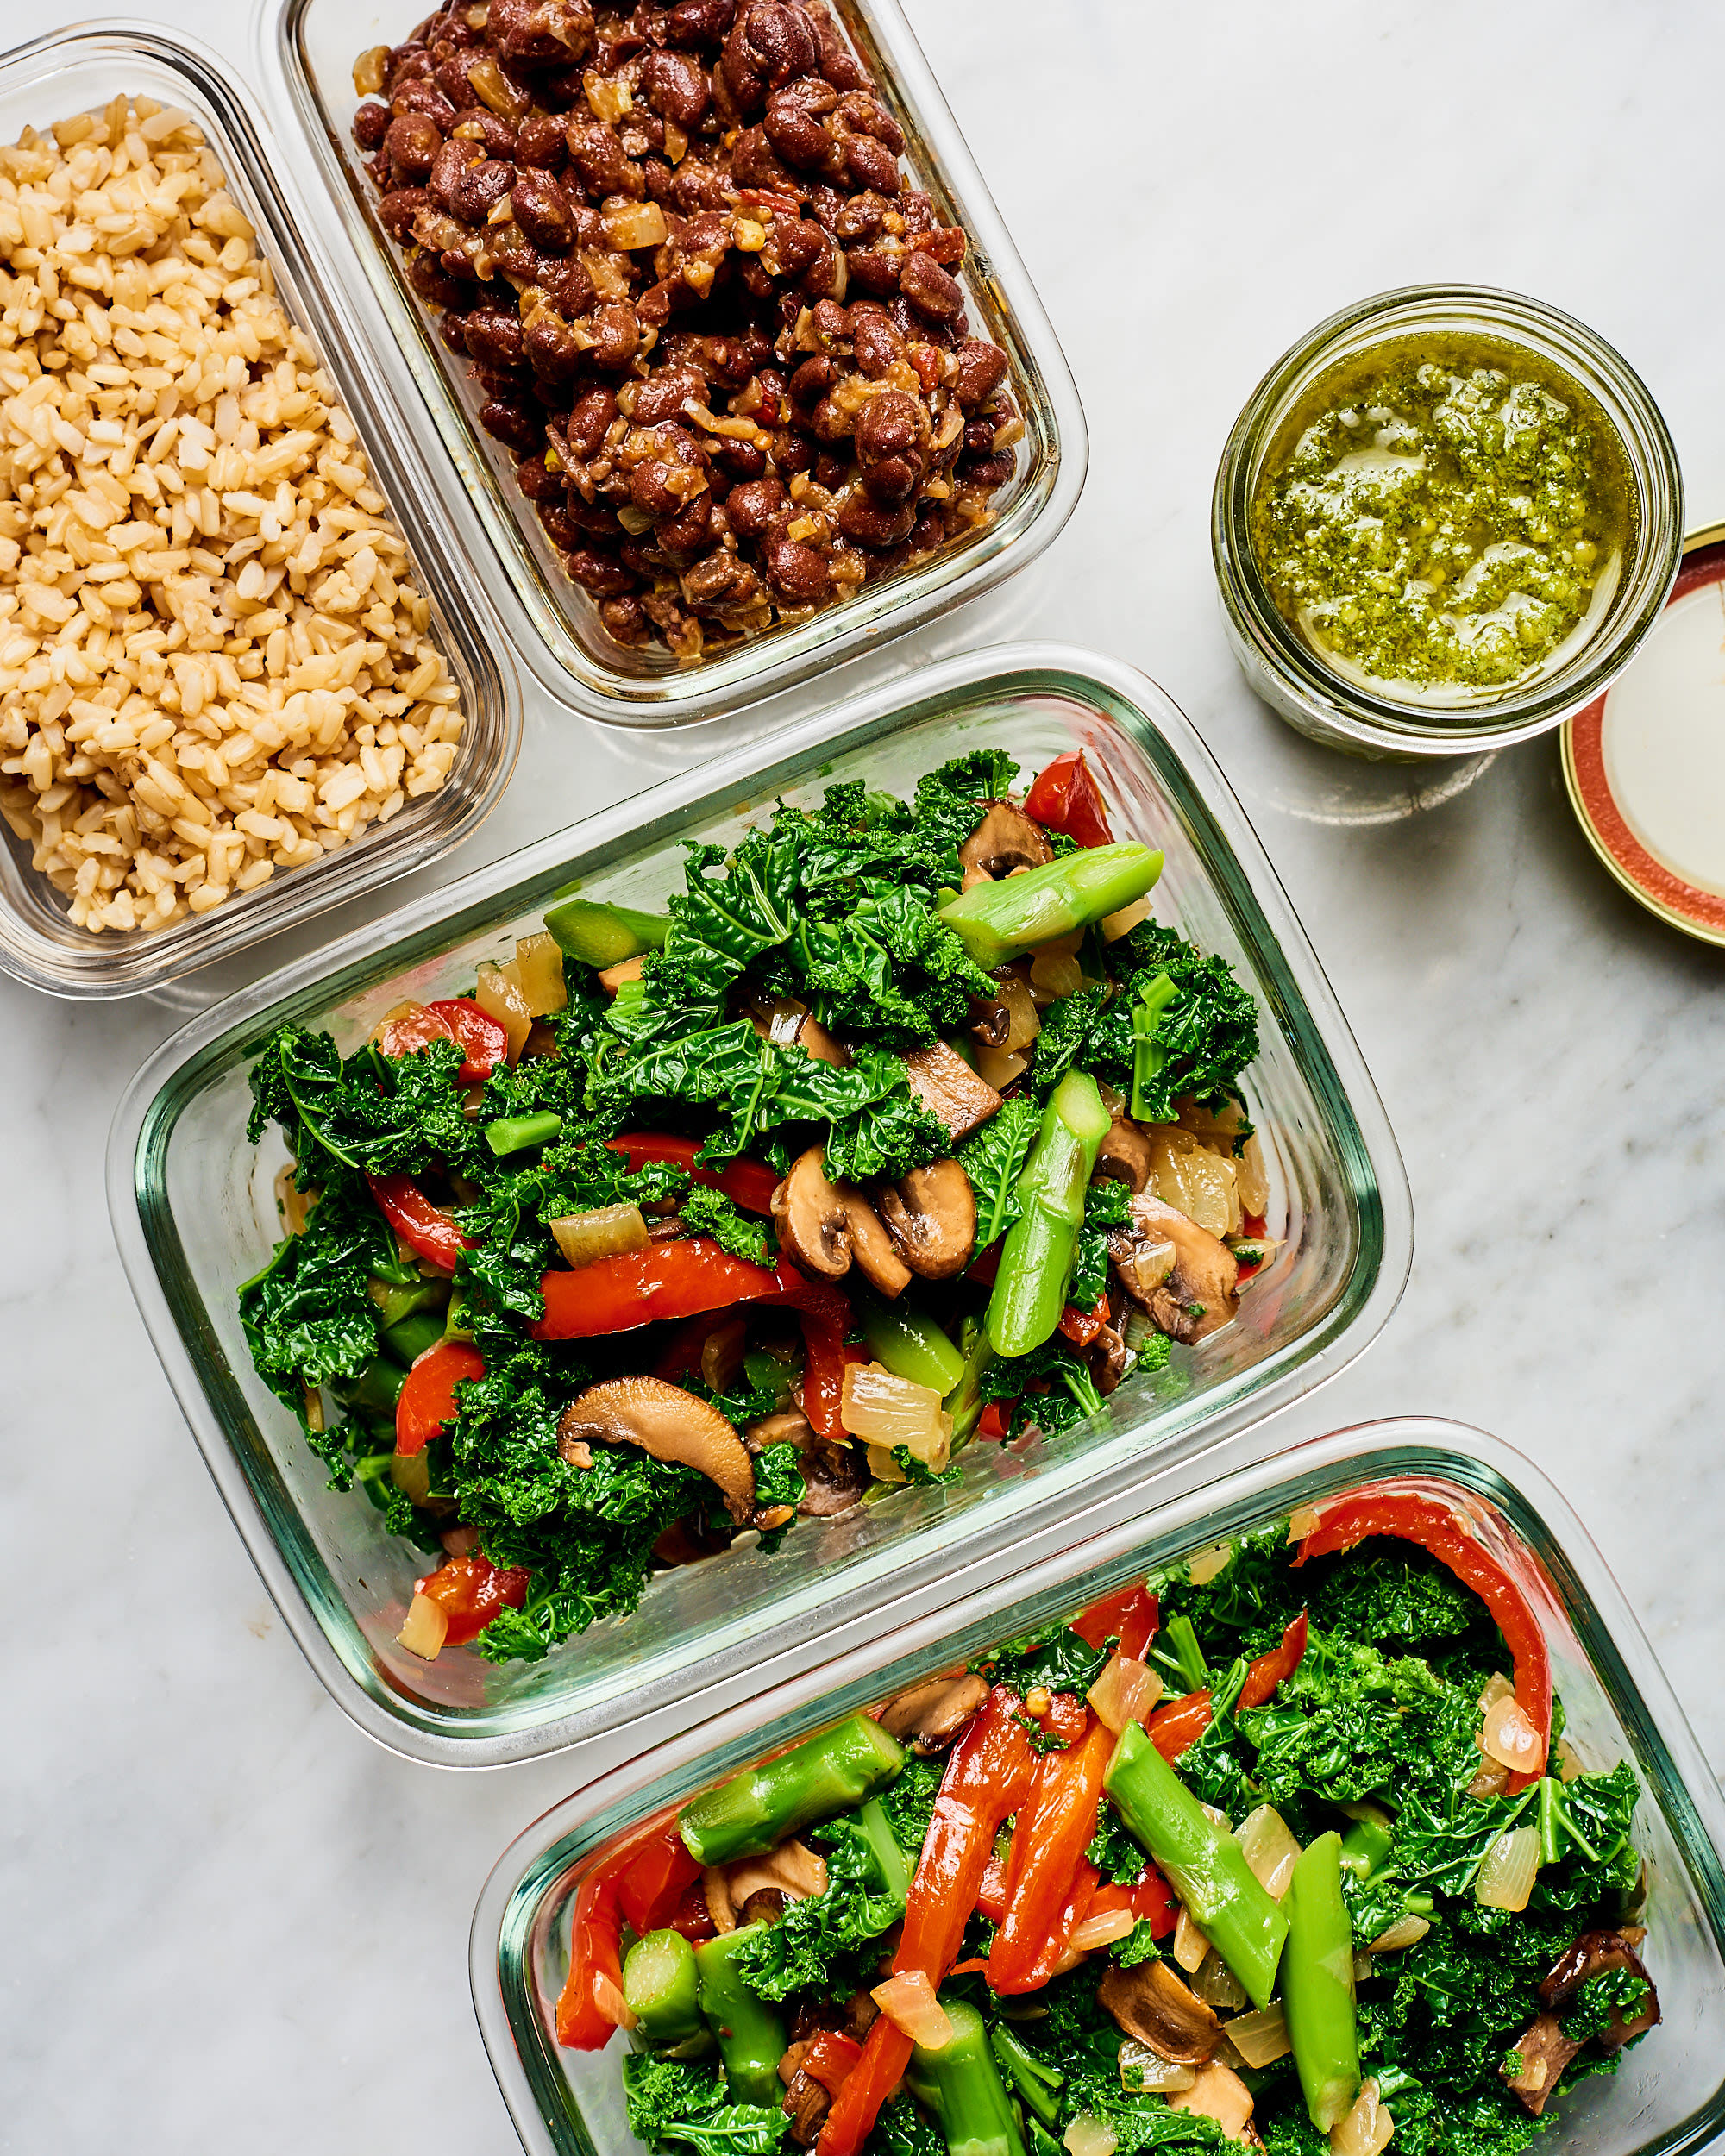 What Makes a Good Meal Prep Recipe